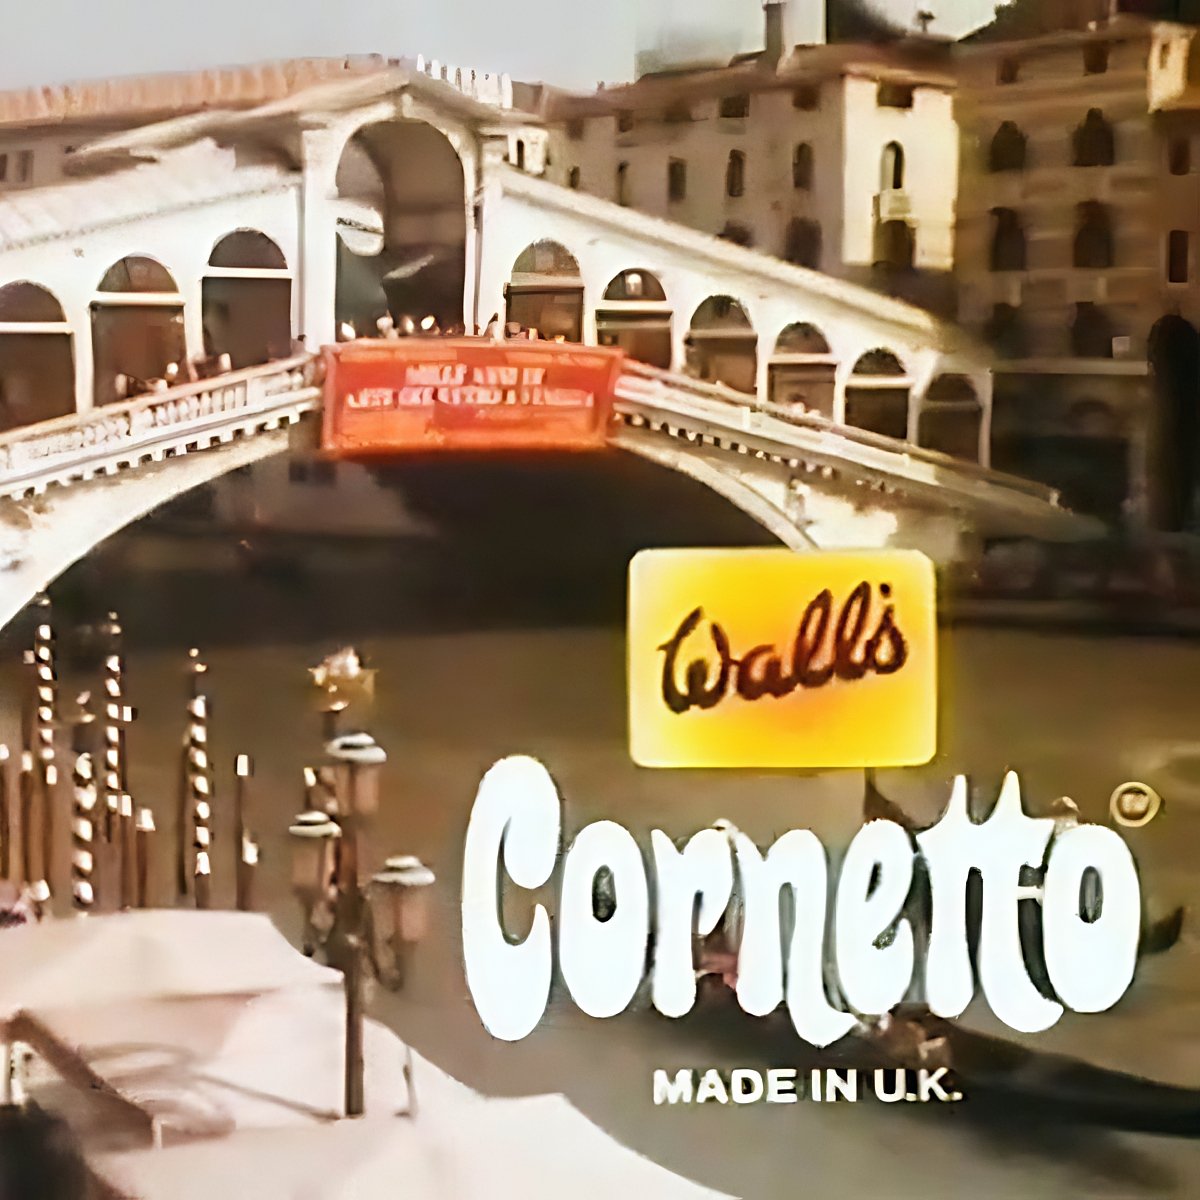 Remembering the "Just One Cornetto" Ads of the 80s